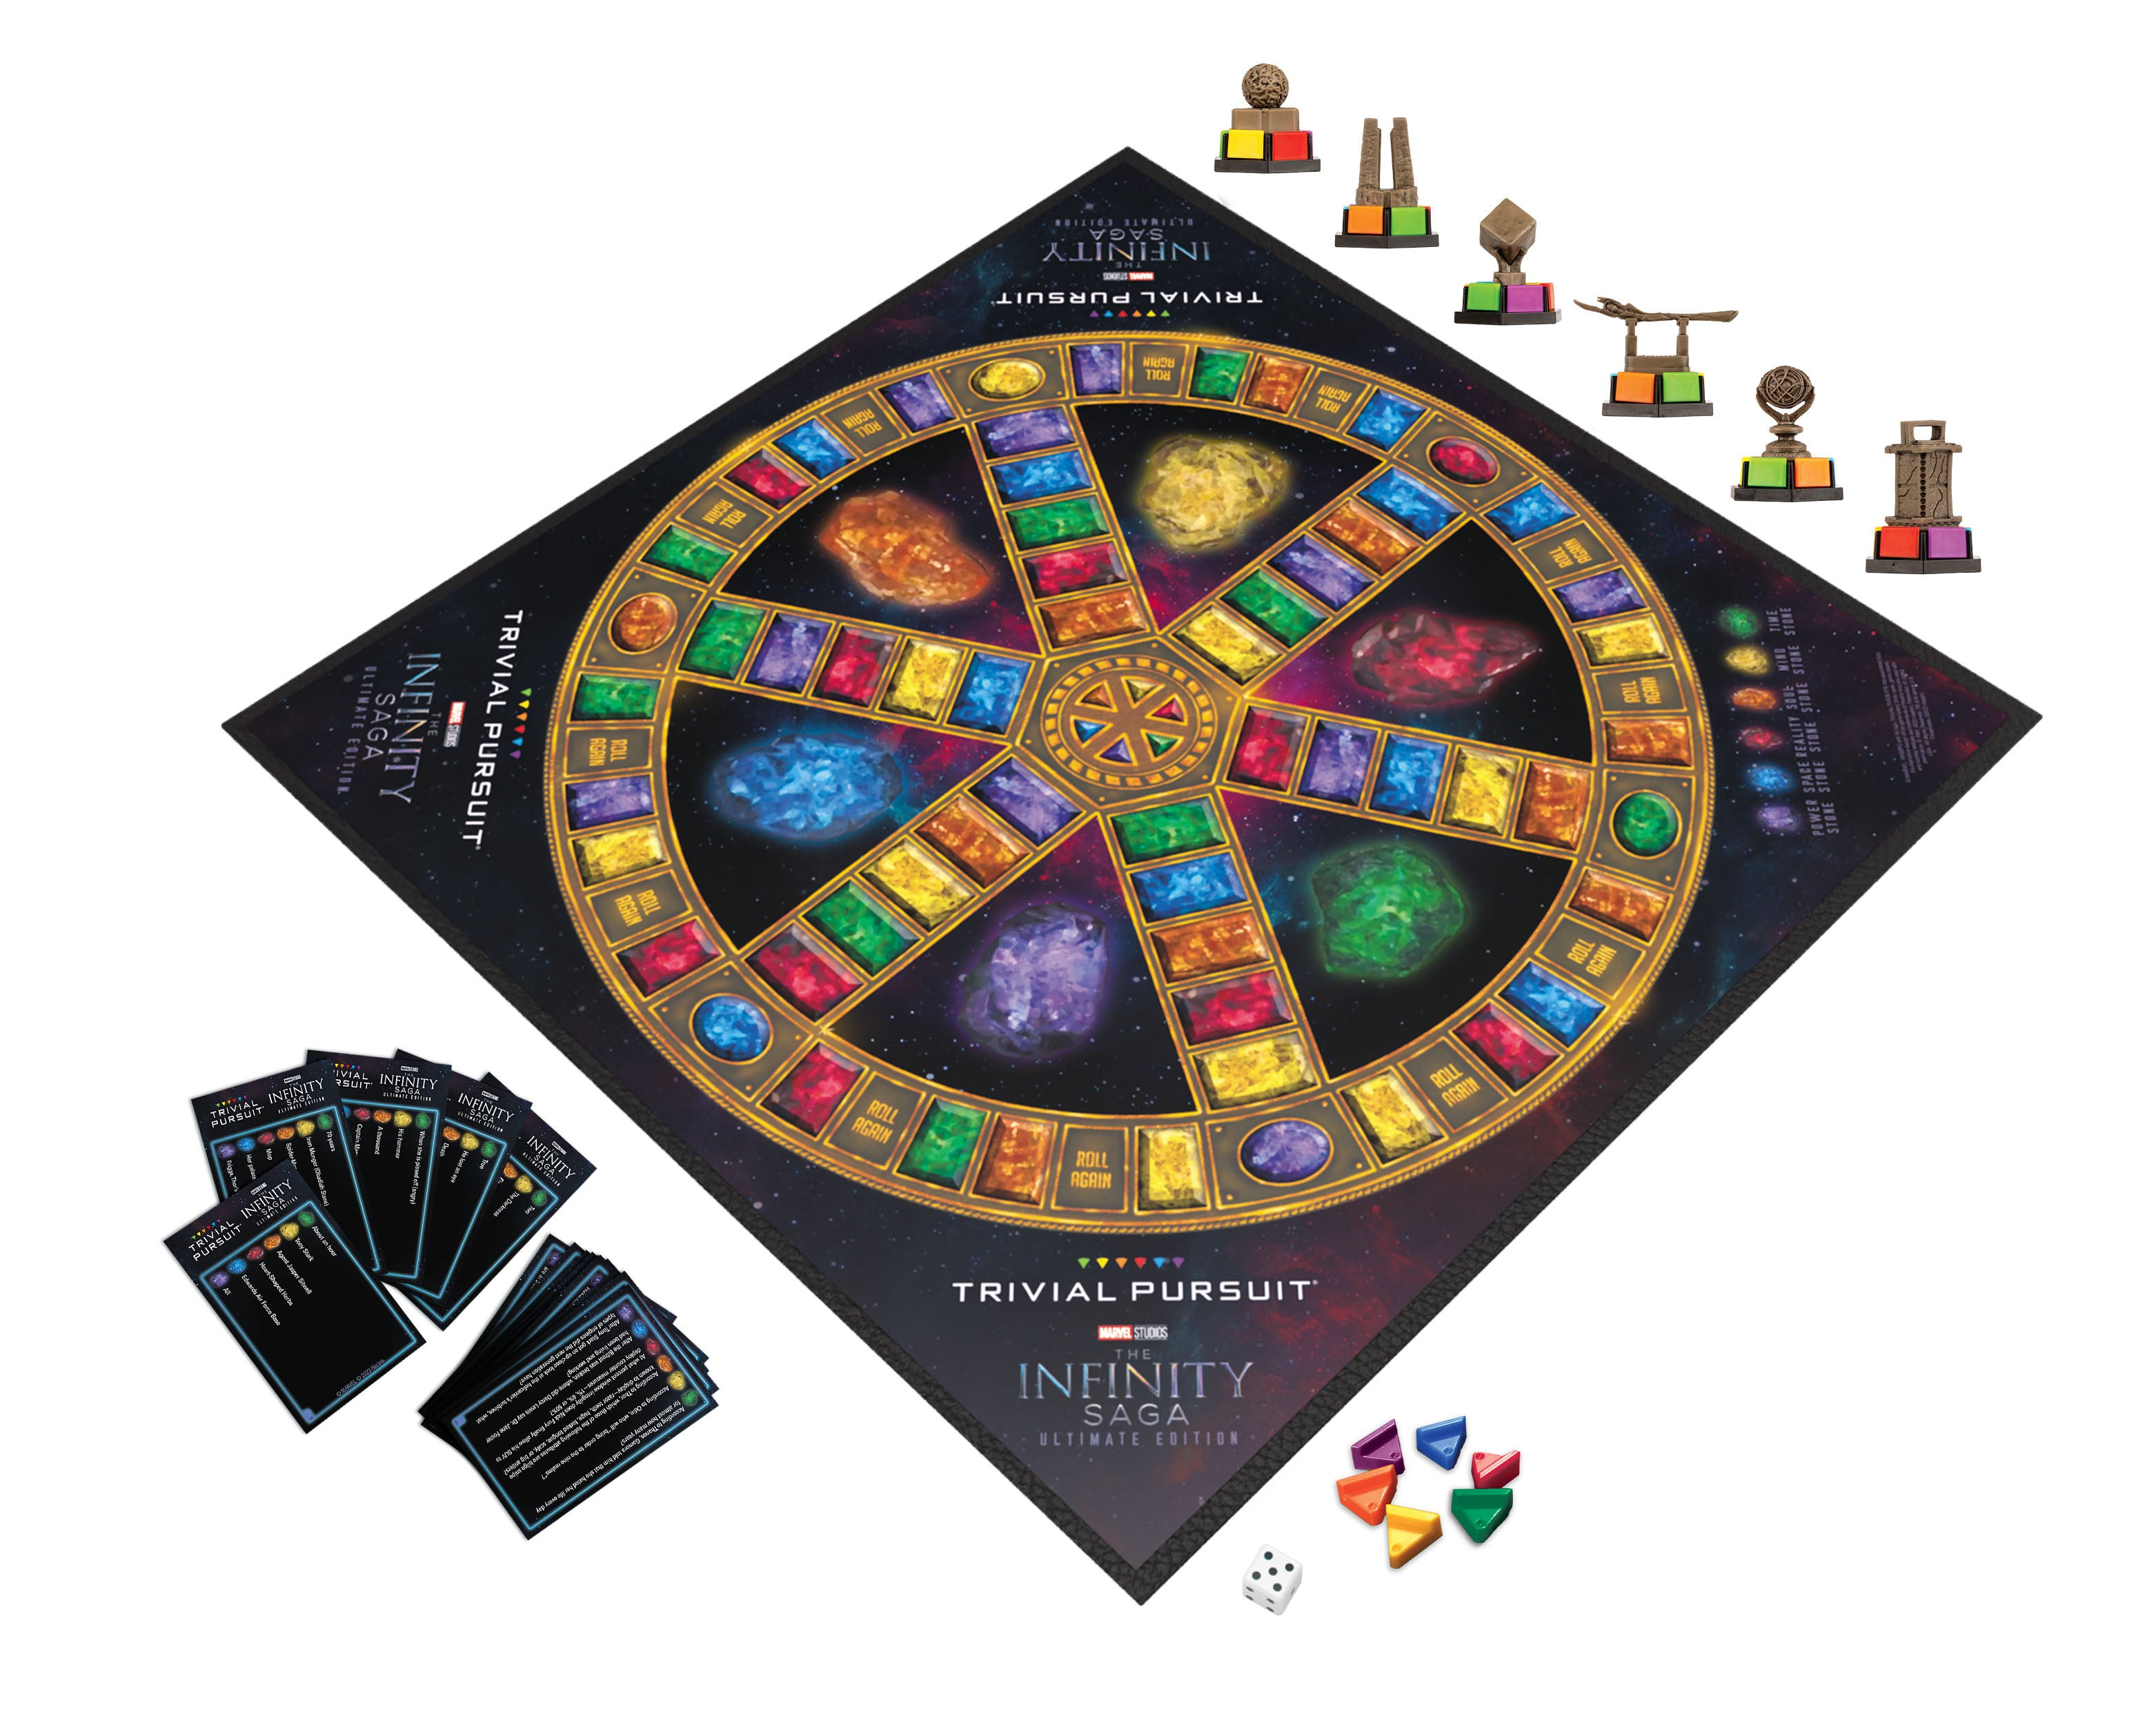 Trivial Pursuit Harry Potter - Ultimate Edition Board Game 1800 Questions  for sale online